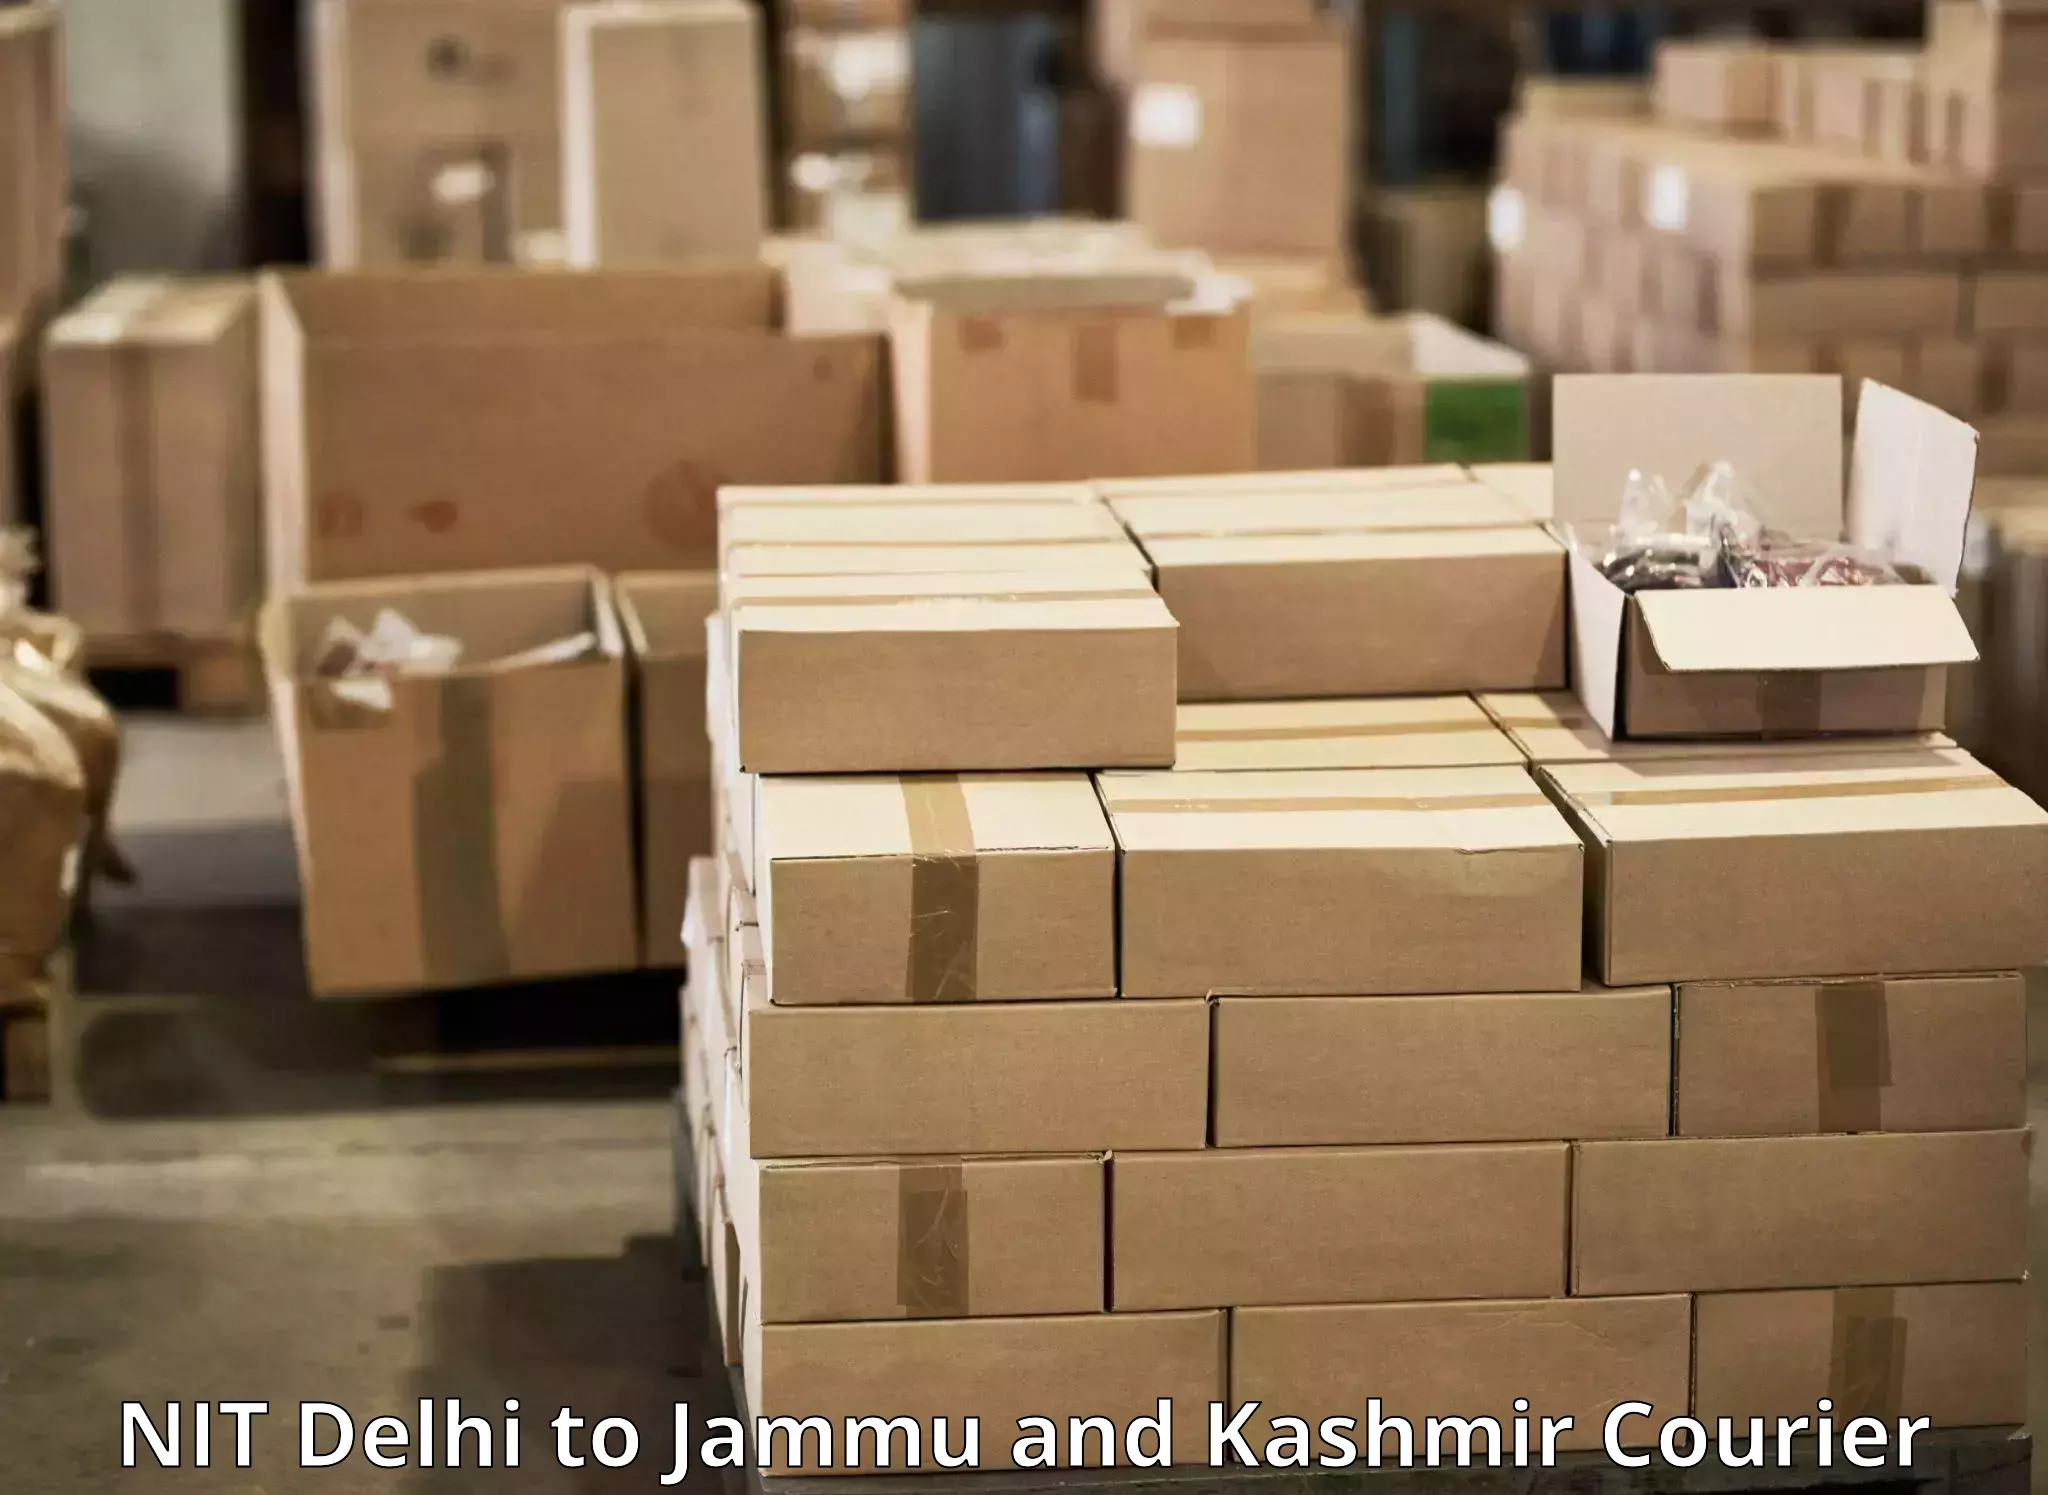 Courier service partnerships NIT Delhi to Jammu and Kashmir